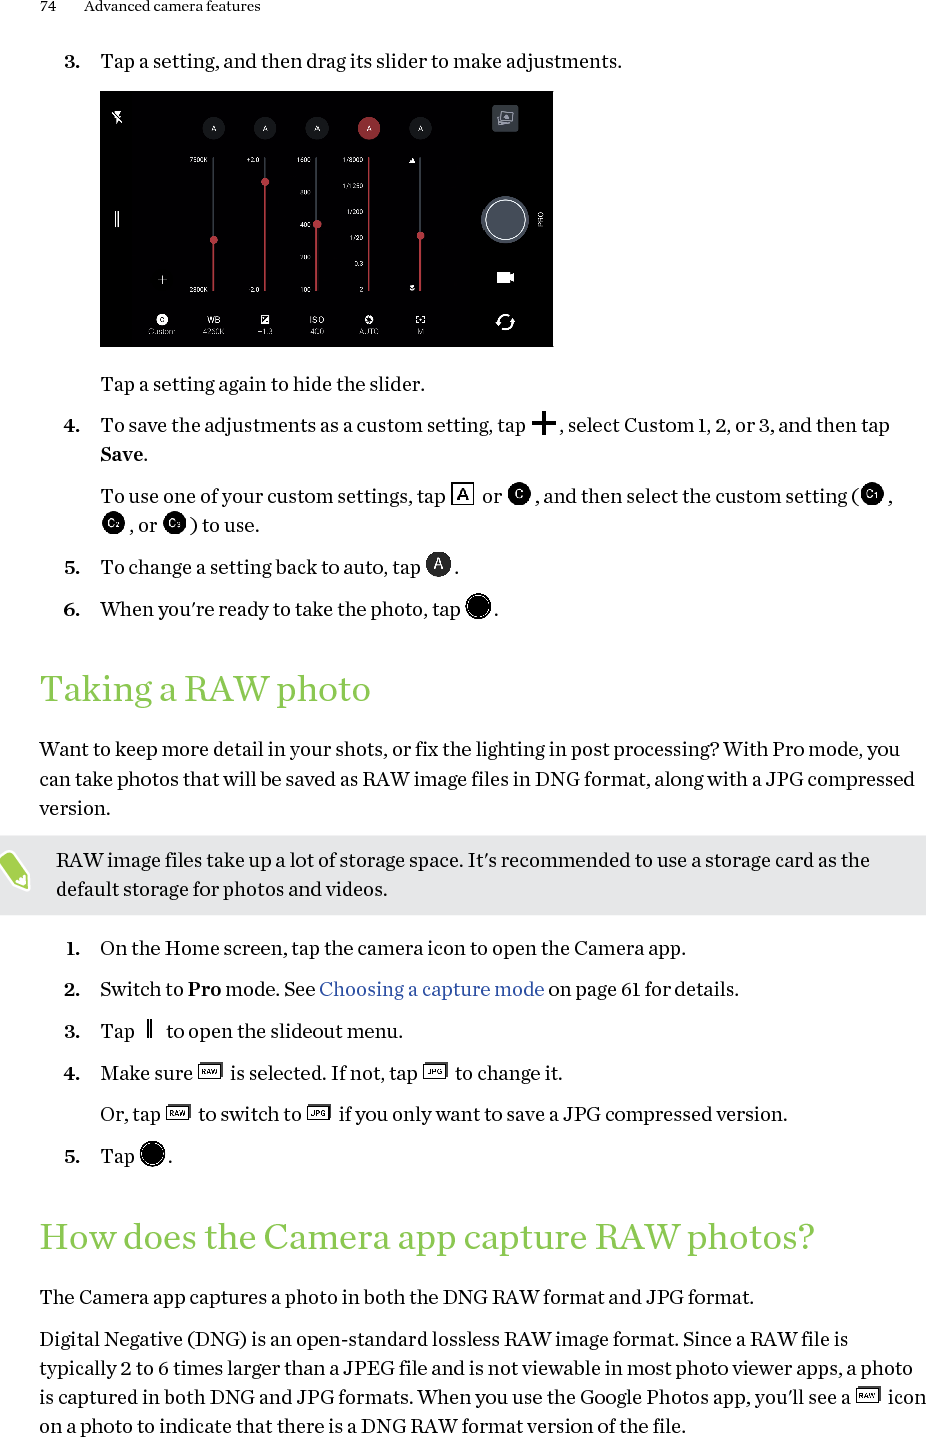 RAW photos are not processed when captured to preserve most of the original image data—such asdynamic range—so you can adjust lighting or make professional adjustments using advanced editingtools. After making adjustments, save the RAW photo as a JPG file if you want to print or share it.75 Advanced camera features